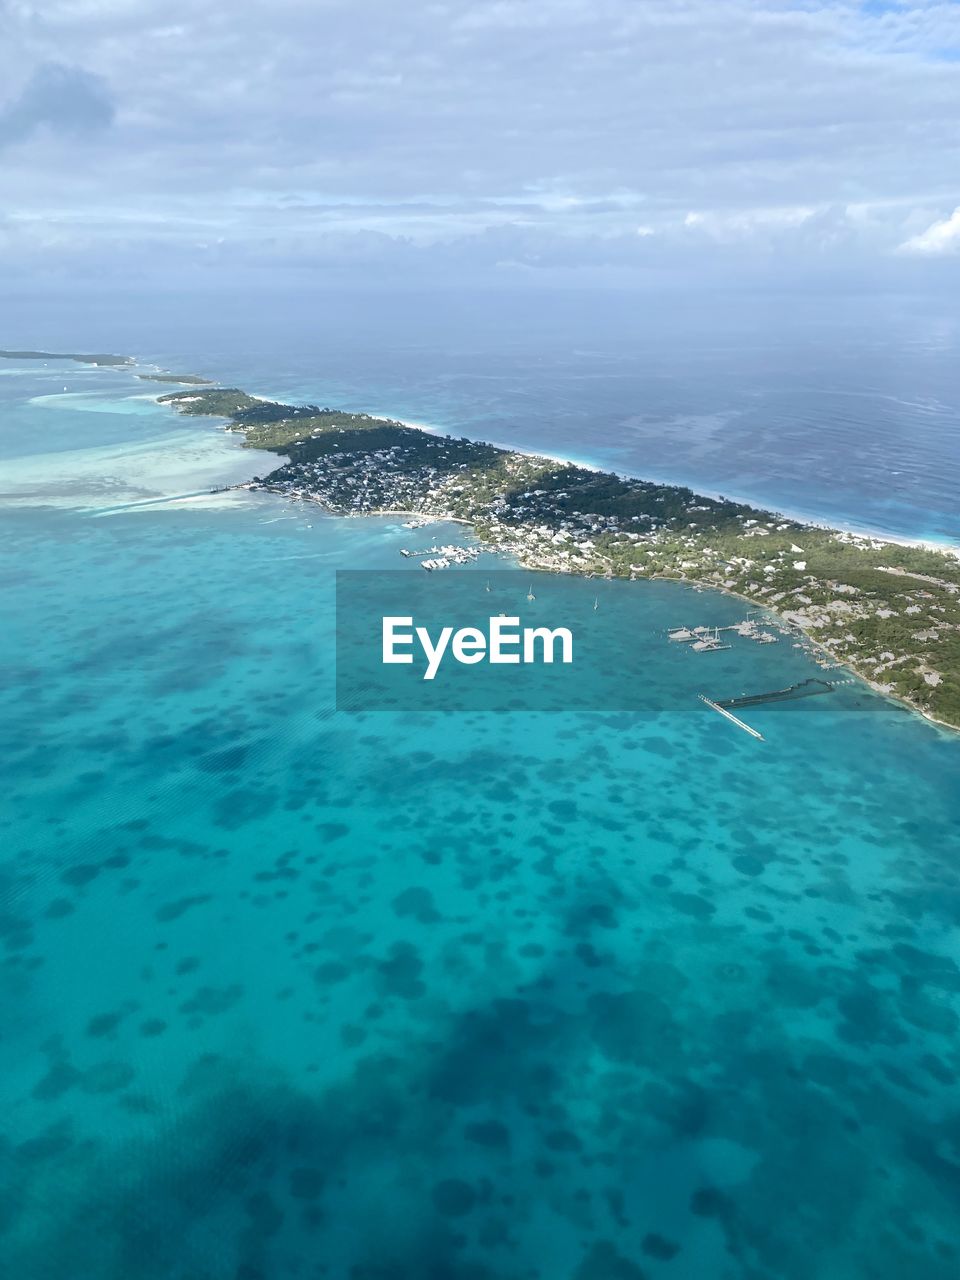 AERIAL VIEW OF ISLAND AGAINST SKY